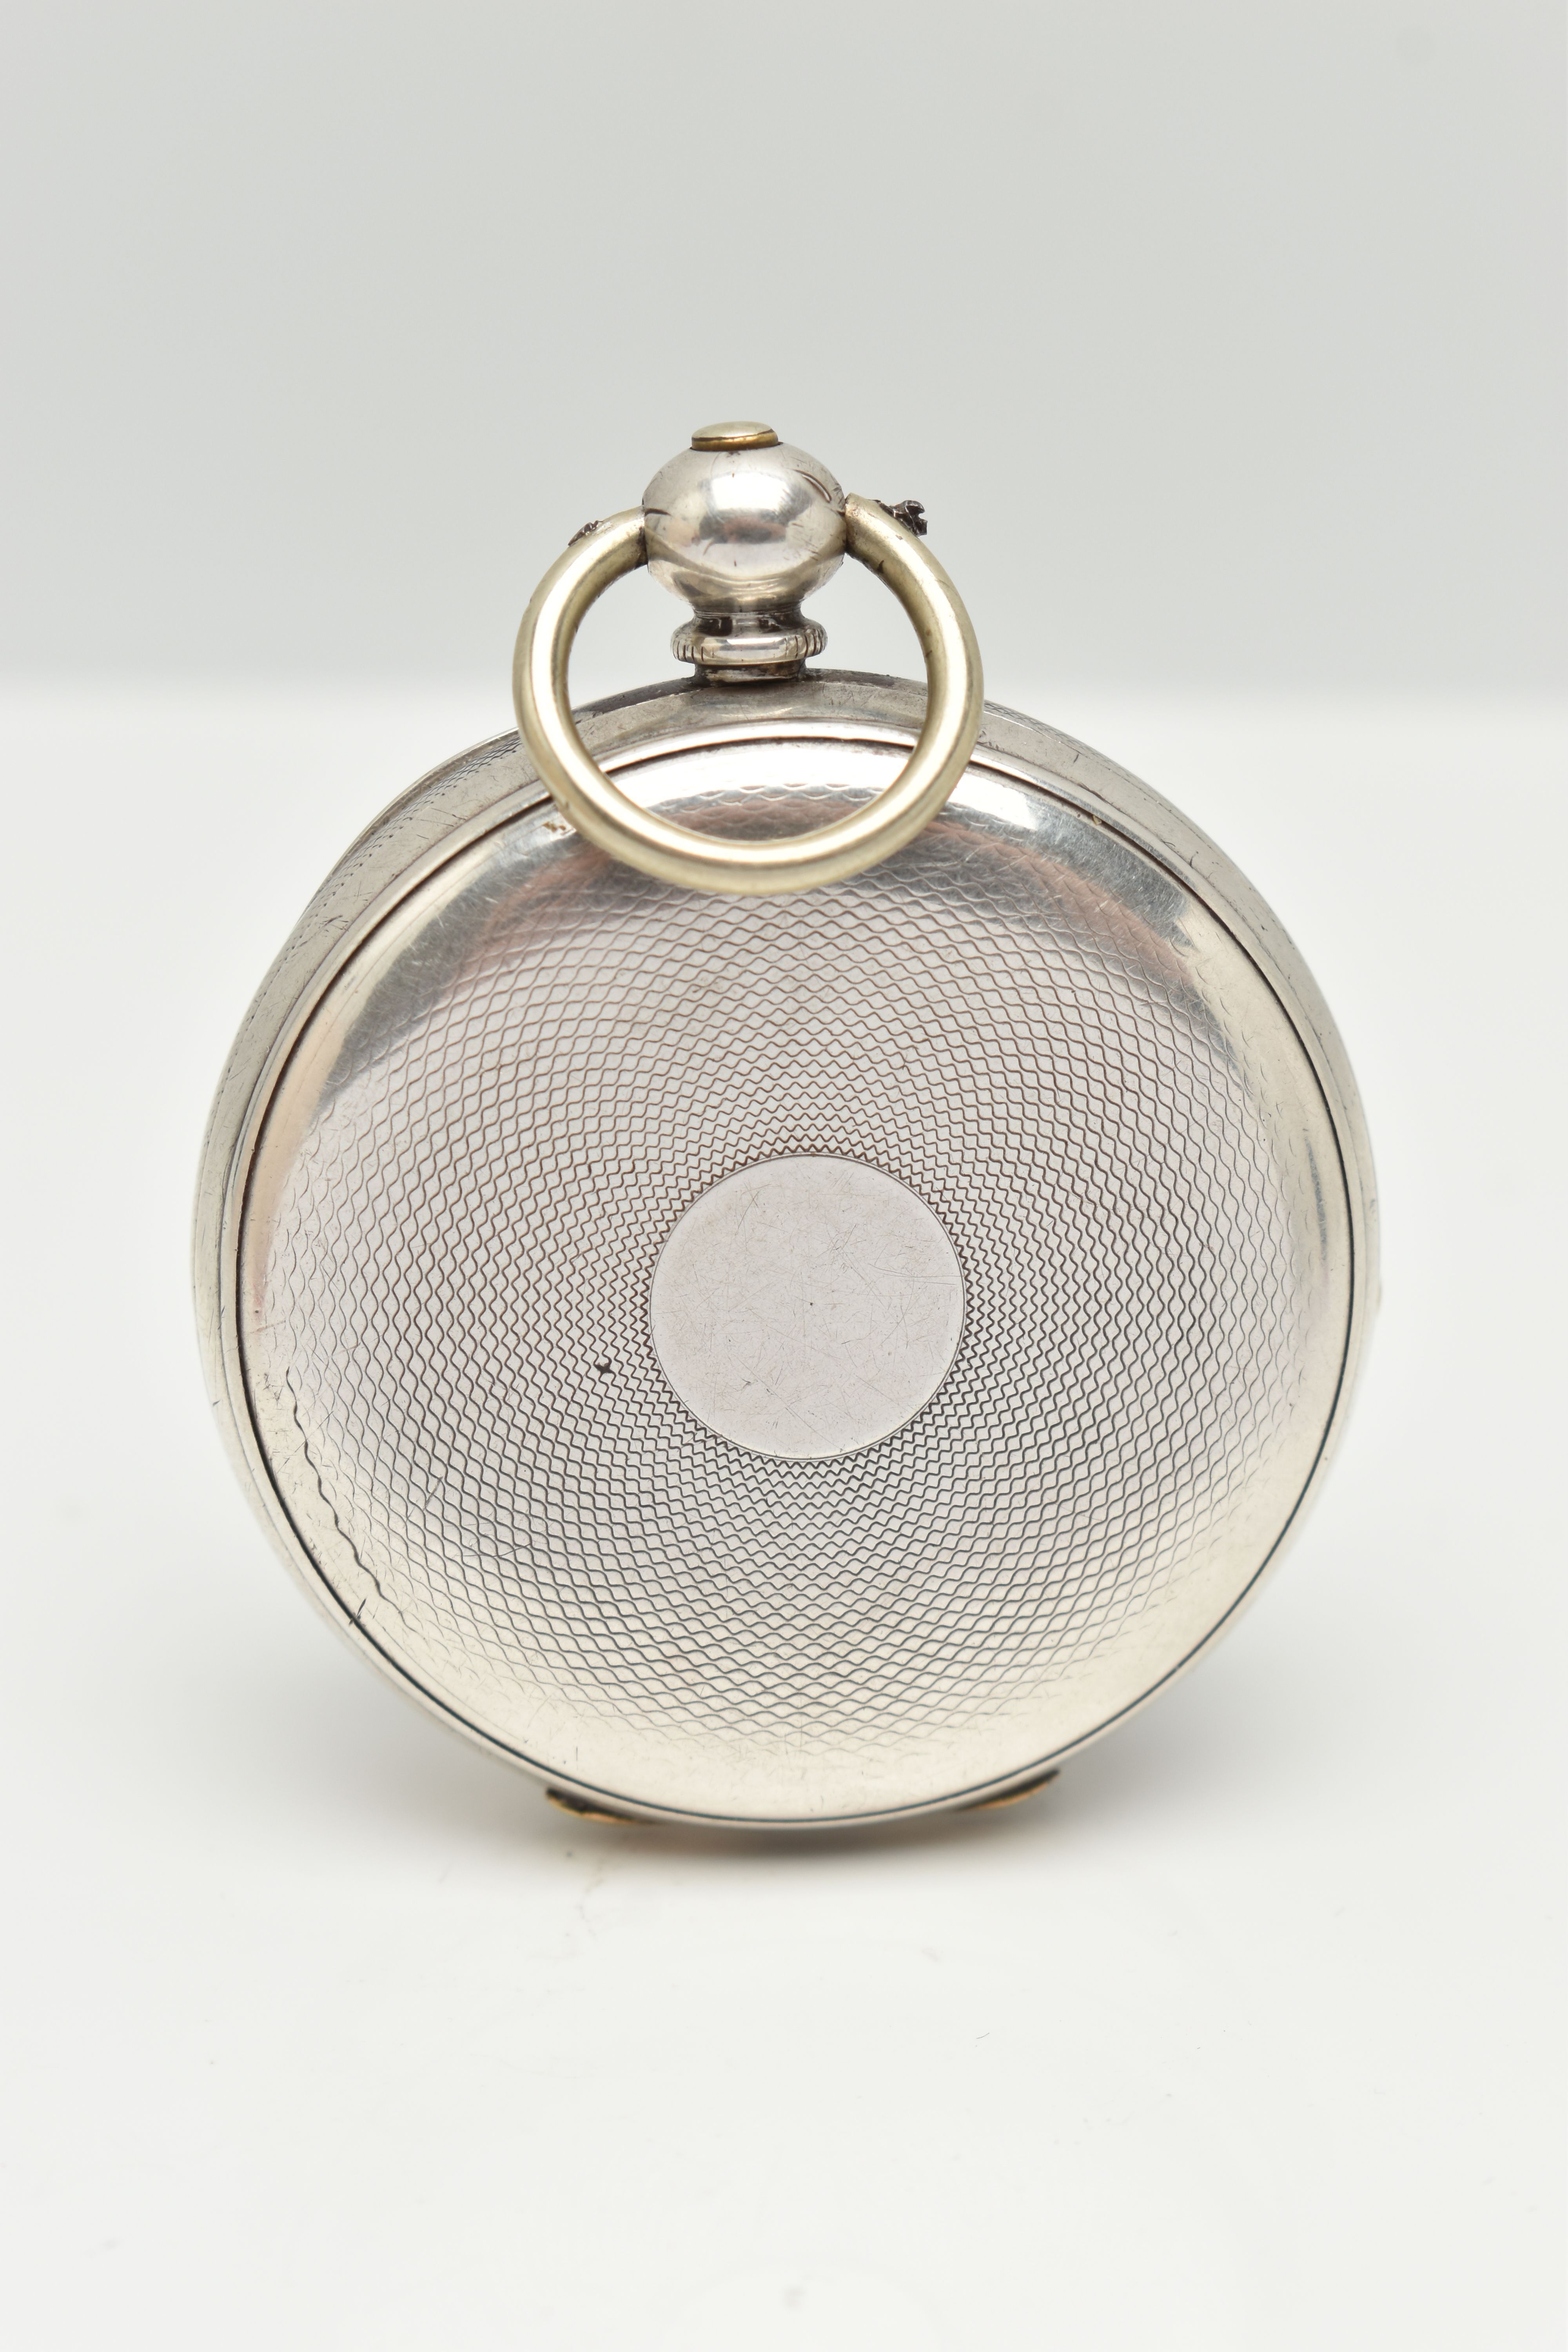 A WHITE METAL FULL HUNTER POCKET WATCH, key wound, engine turned pattern with vacant cartouche, - Image 2 of 5